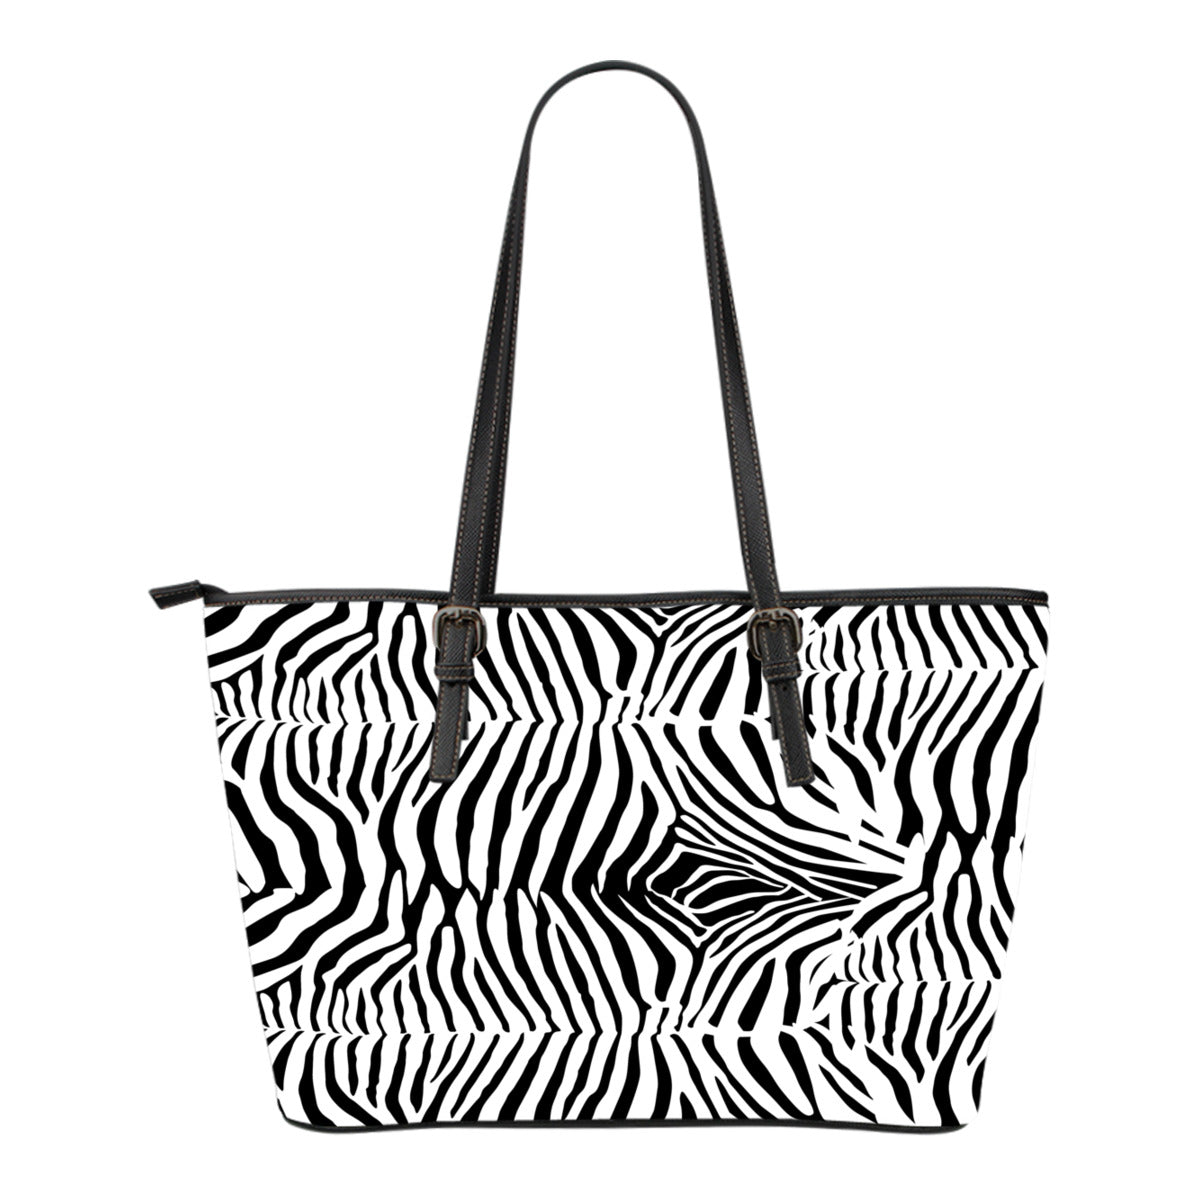 Animal Print BW Themed Design C5 Women Small Leather Tote Bag